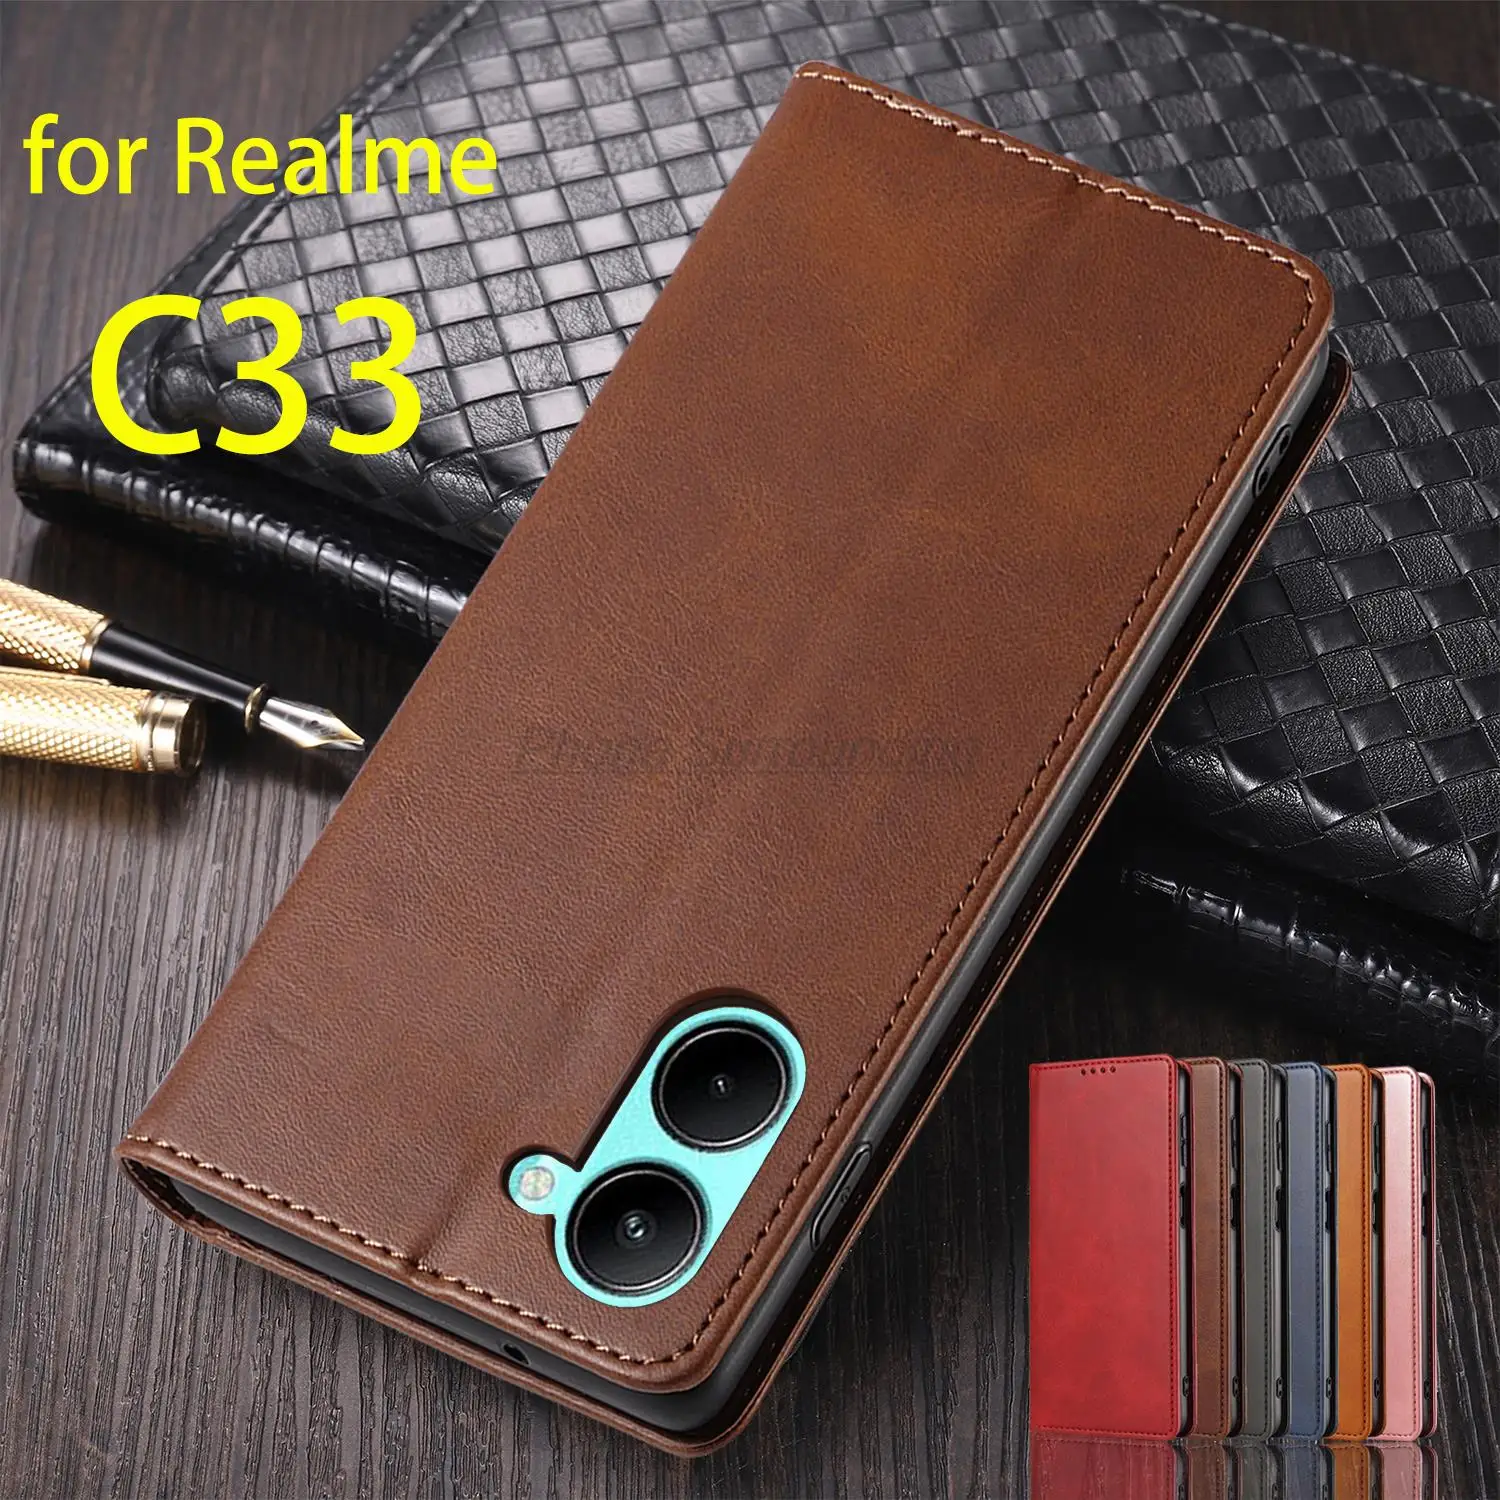 

Leather Case for OPPO Realme C33 Flip Case Card Holder Holster Magnetic Attraction Cover Realme C33 Wallet Case Fundas Coque